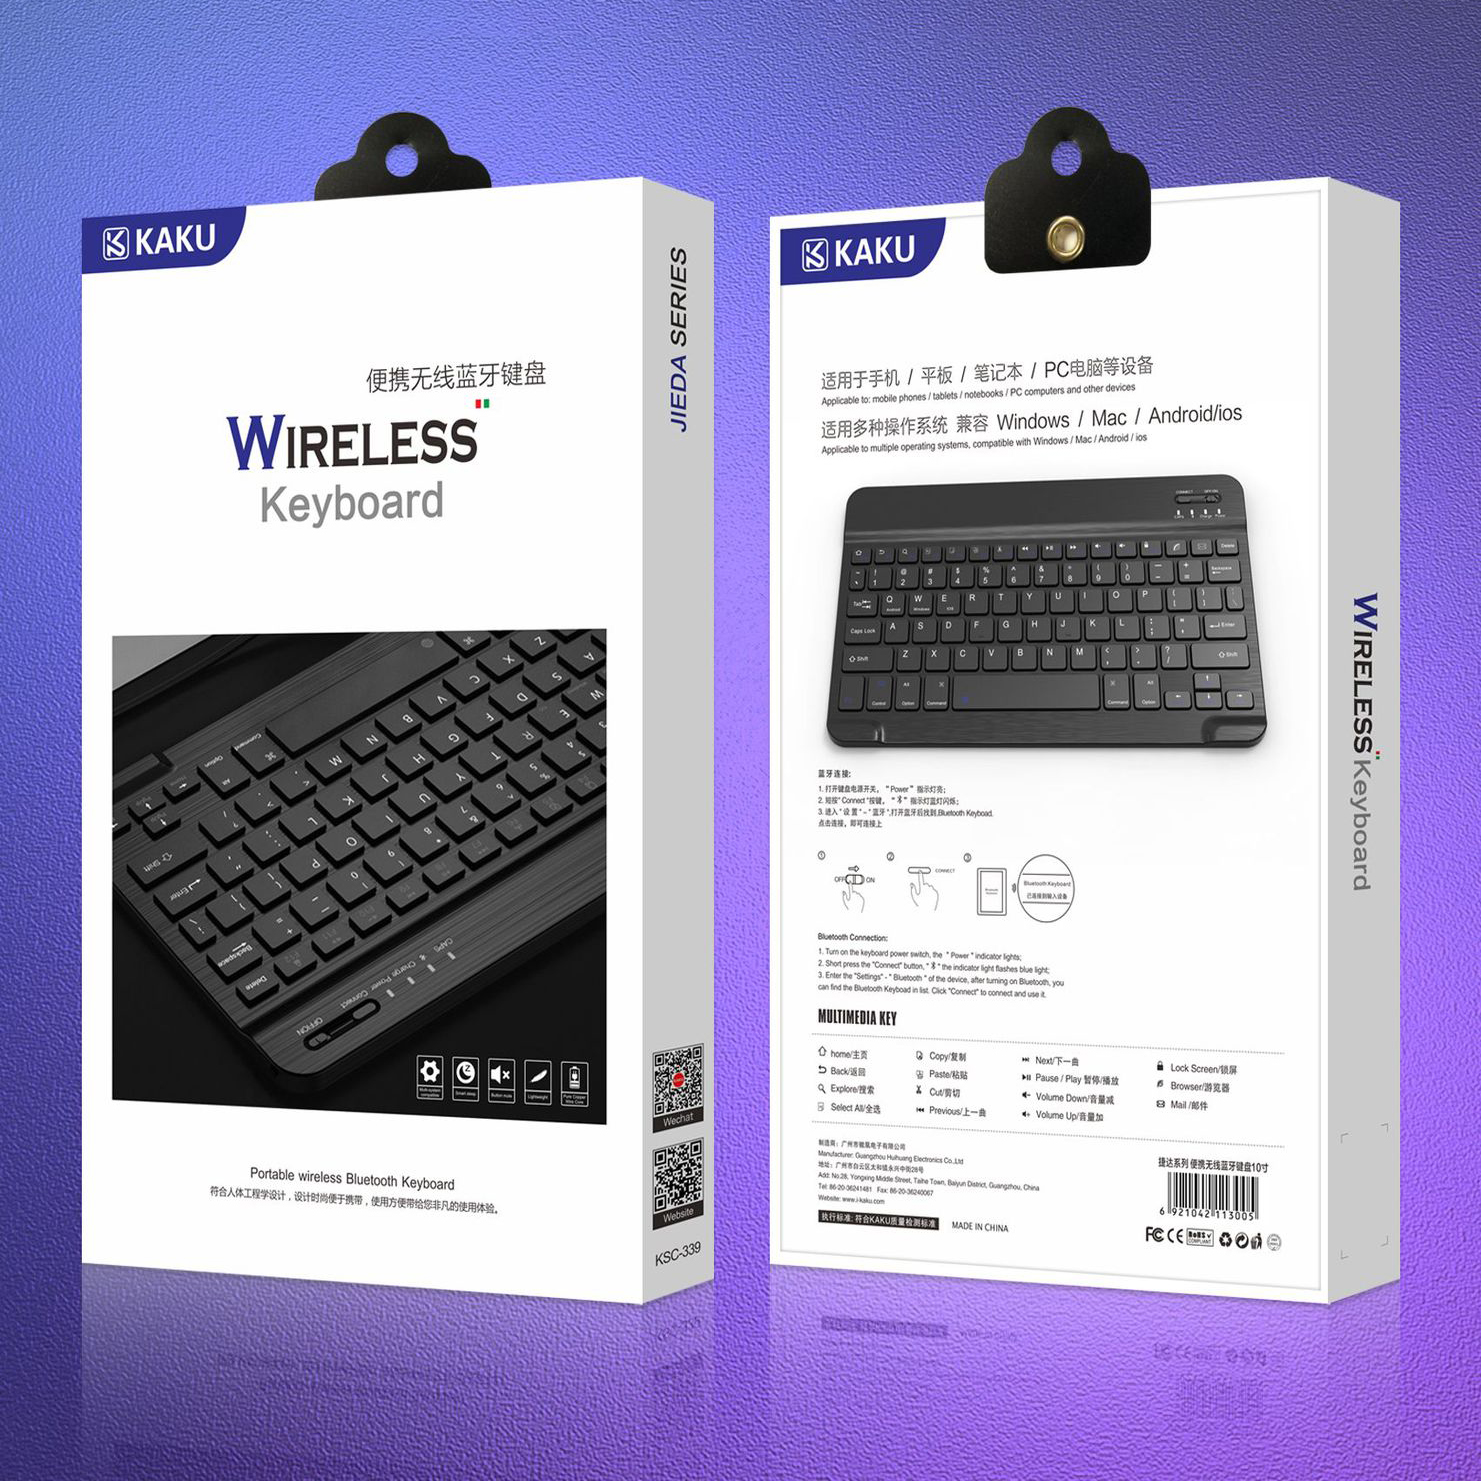 KAKU-8-10-inch-180mAh-Wireless-bluetooth-Keyboard-for-iPad--Mobile-Phone--Tablet-PC-iOS-Android-Syst-1859003-7